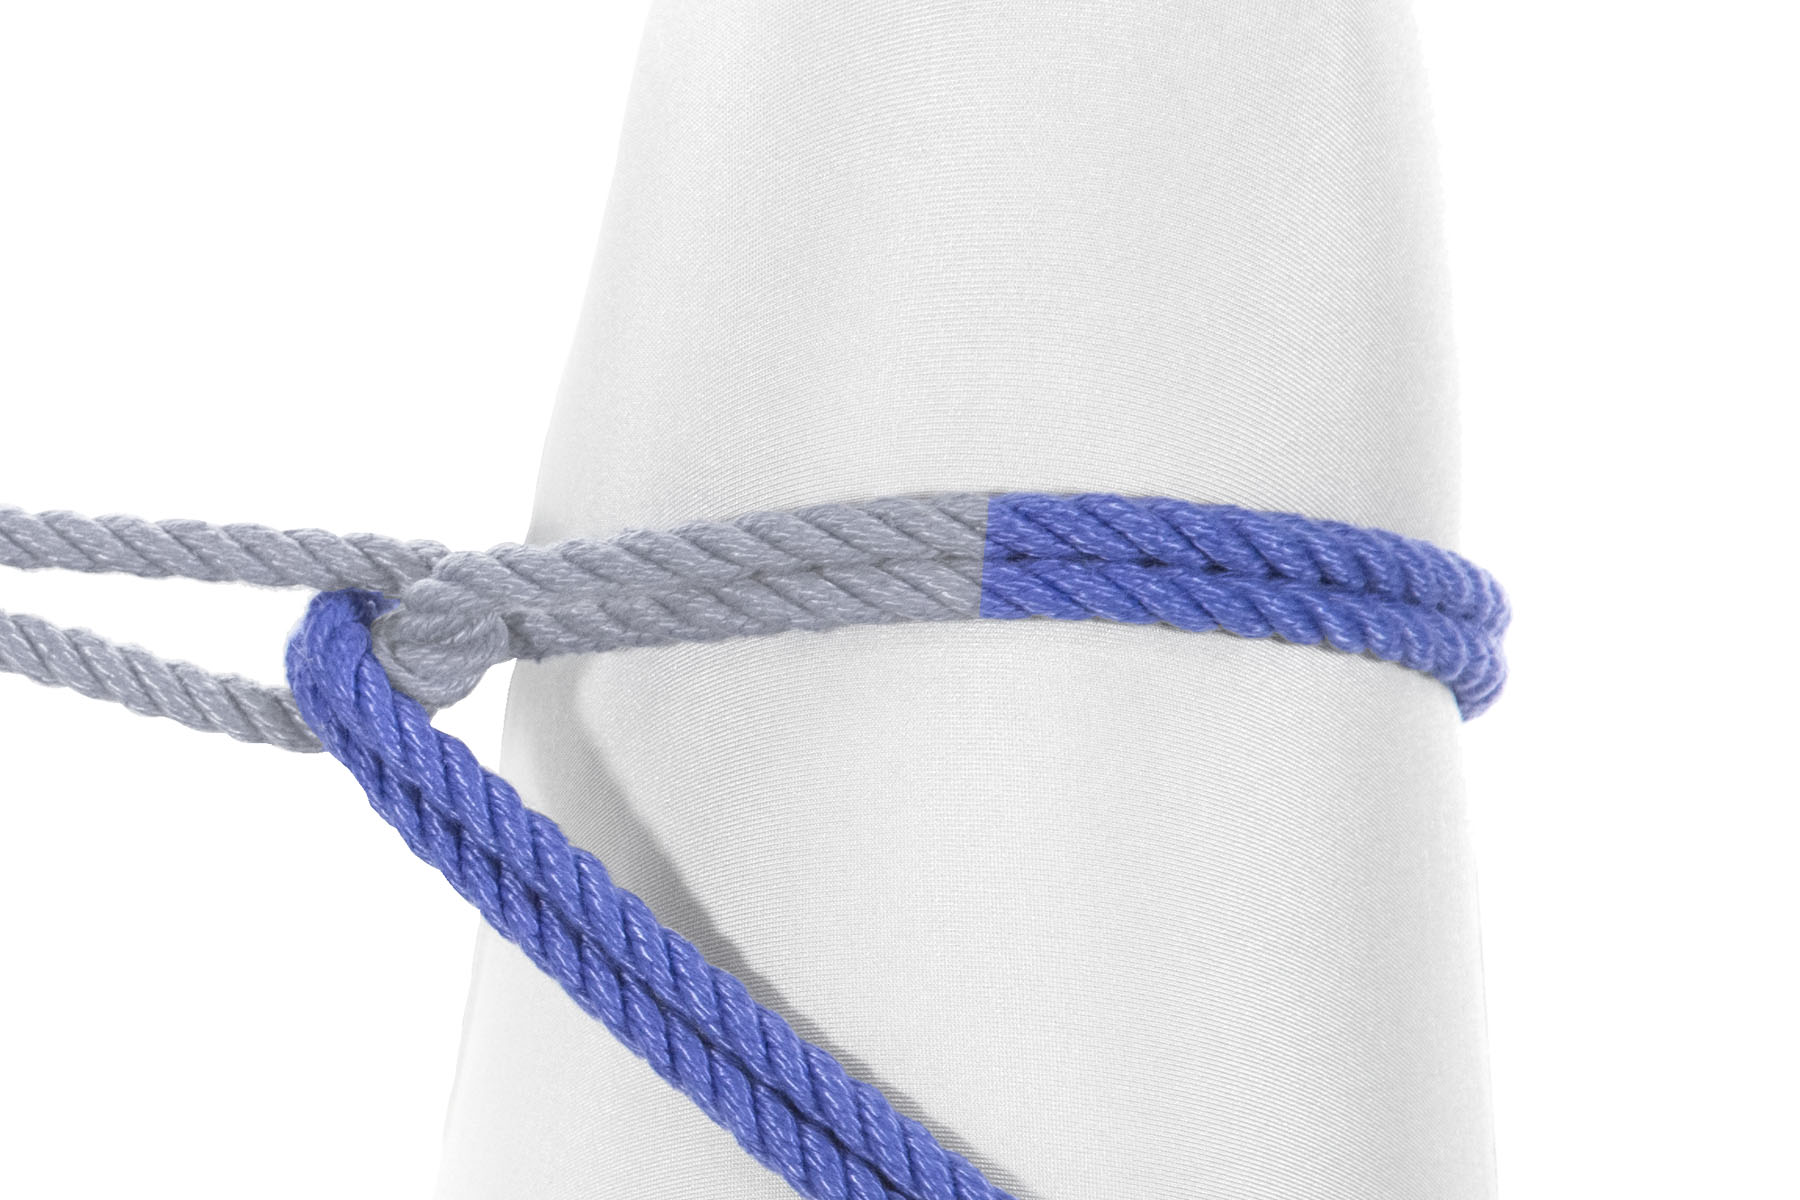 The rope makes a single clockwise wrap around the leg, six inches above the knee. At the end of the wrap, it passes over the overhand knot from the previous step, passing in between the two halves of the standing part of the rope. It then travels down and right, exiting the image.